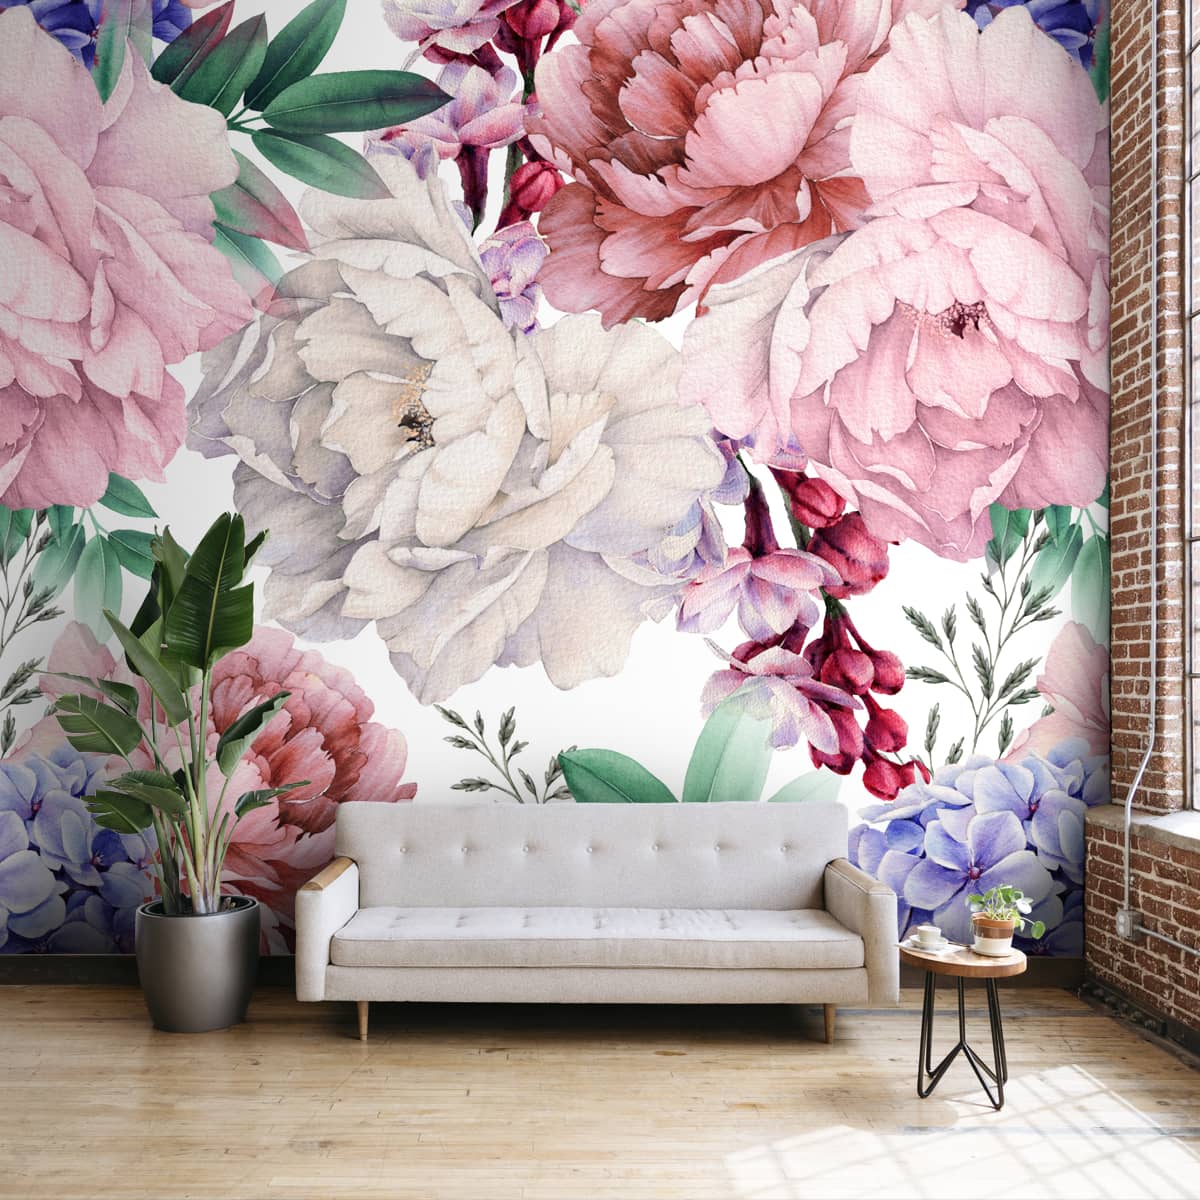 Water Color Painted Look Floral Wallpaper for Bedrooms, Big Floral Pattern